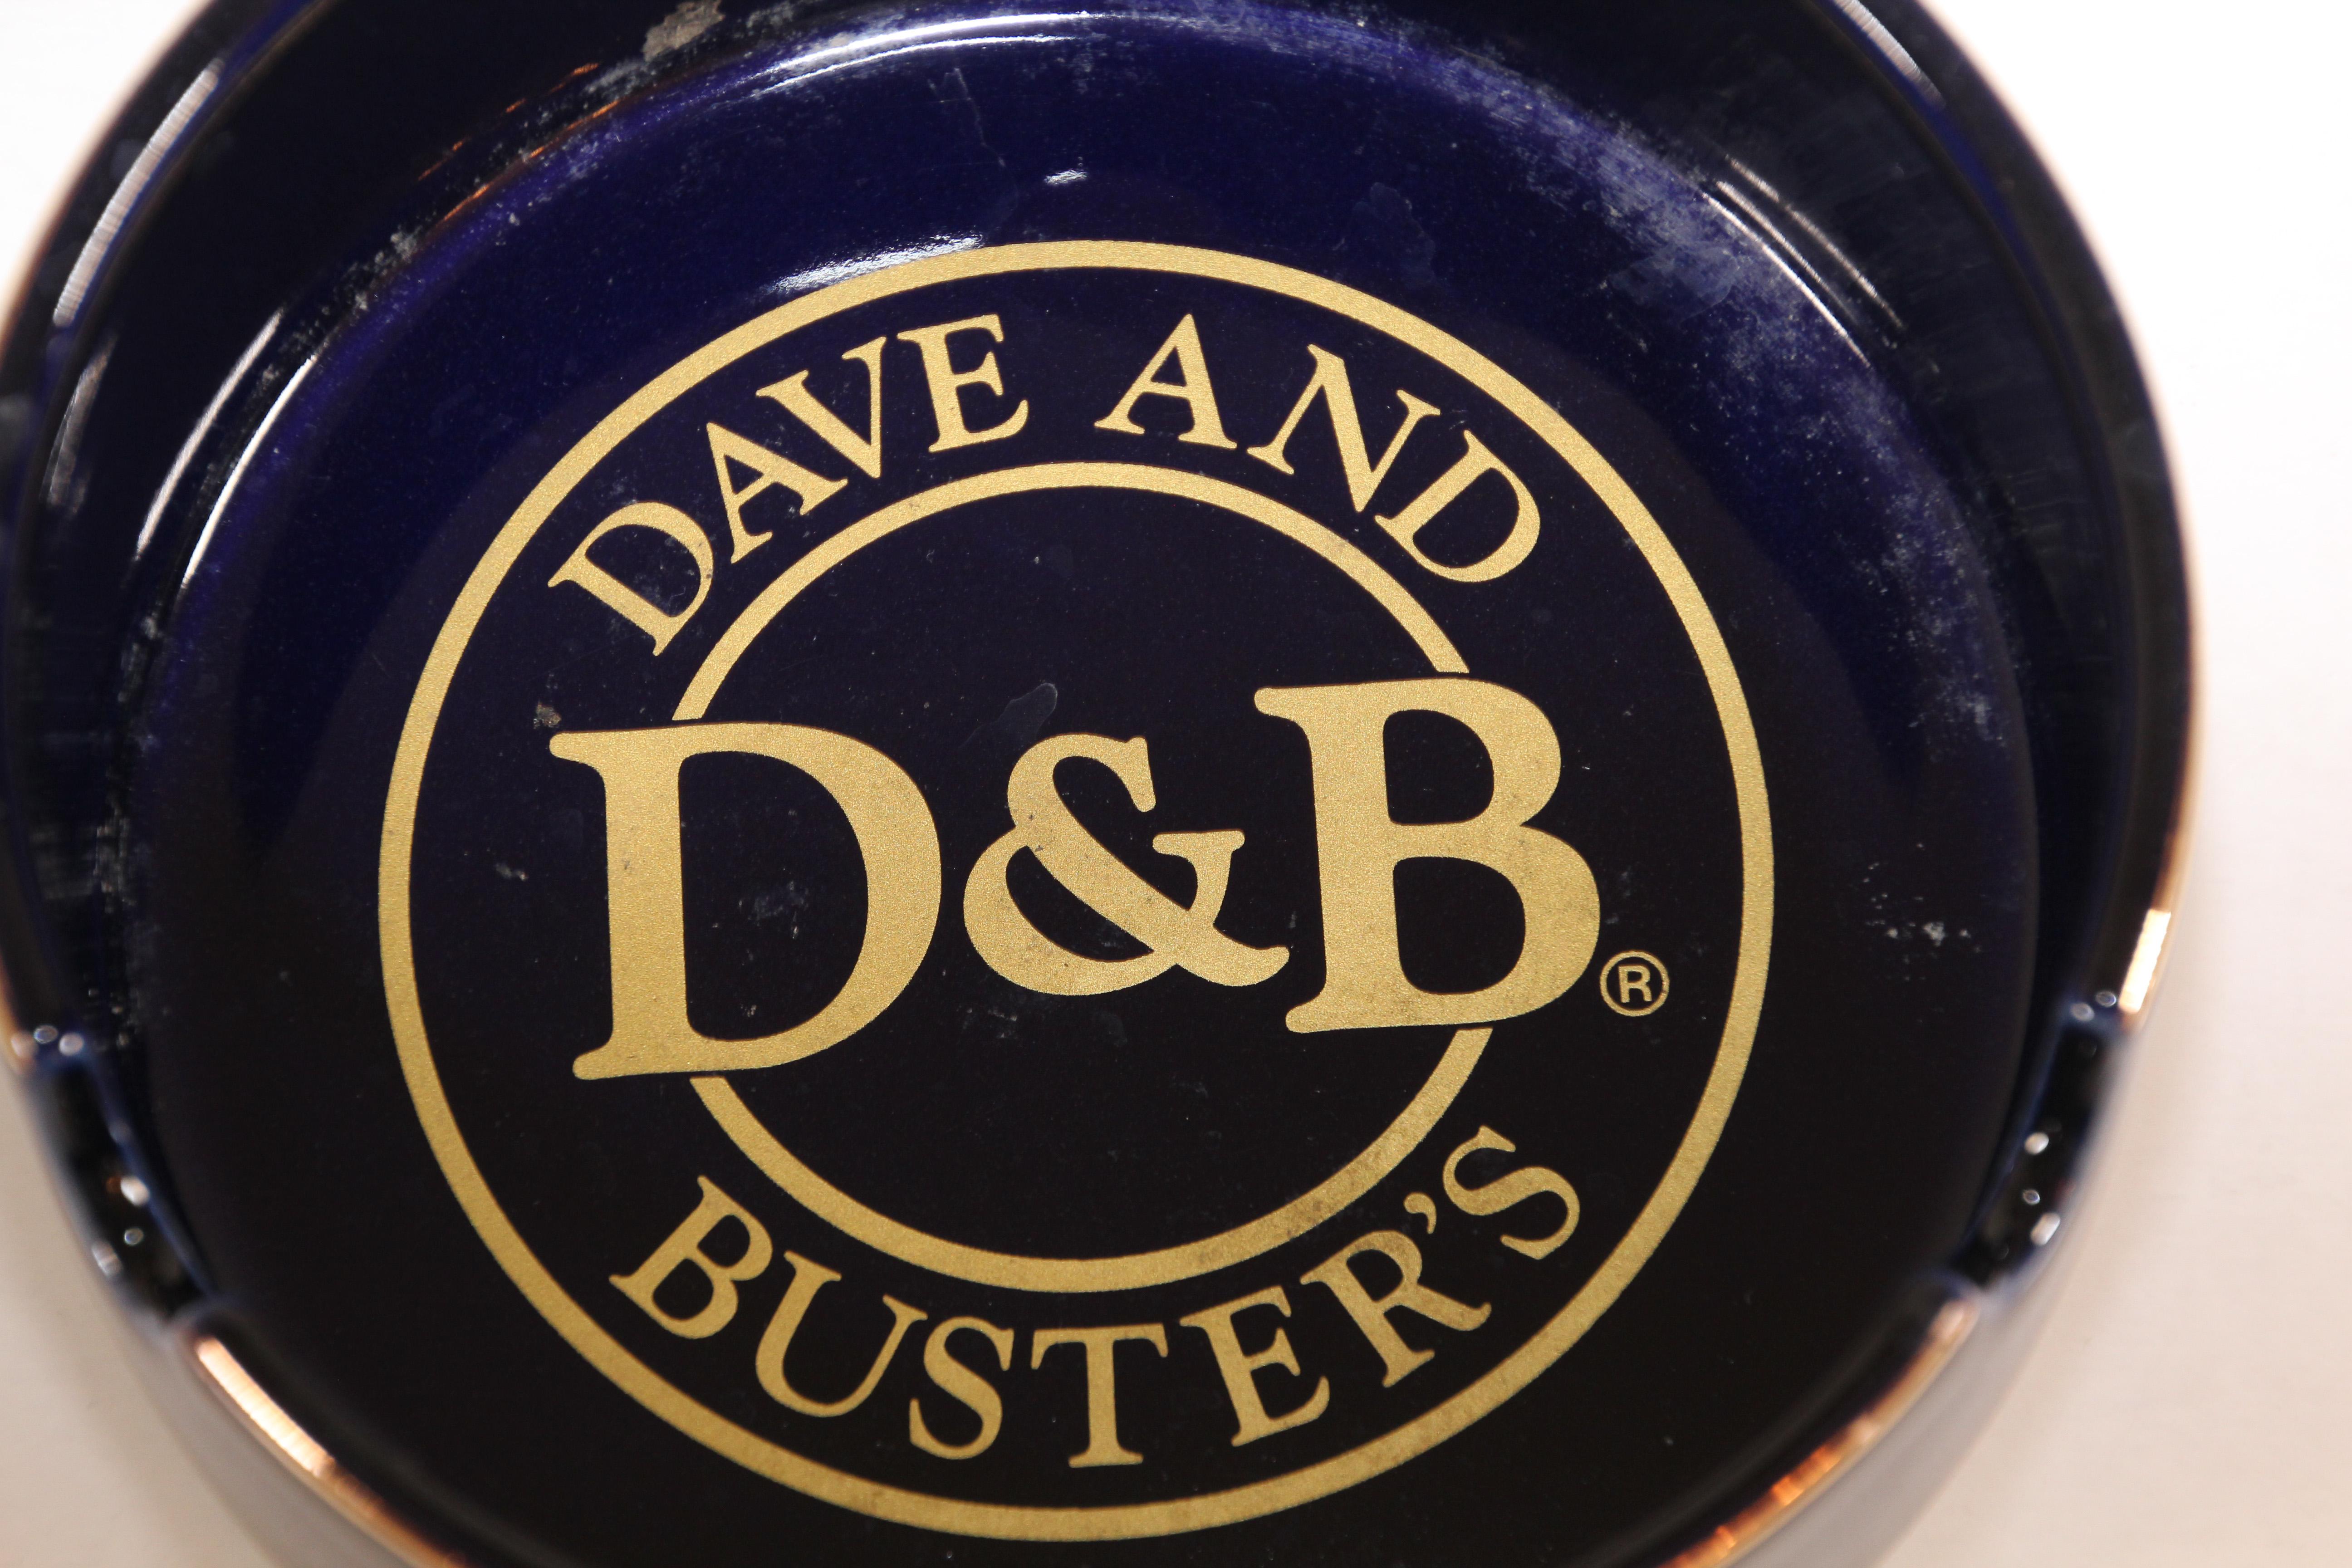 Large round blue and gold ceramic ashtray.
D&B, Dave and Busters advertising vintage ceramic ashtray.